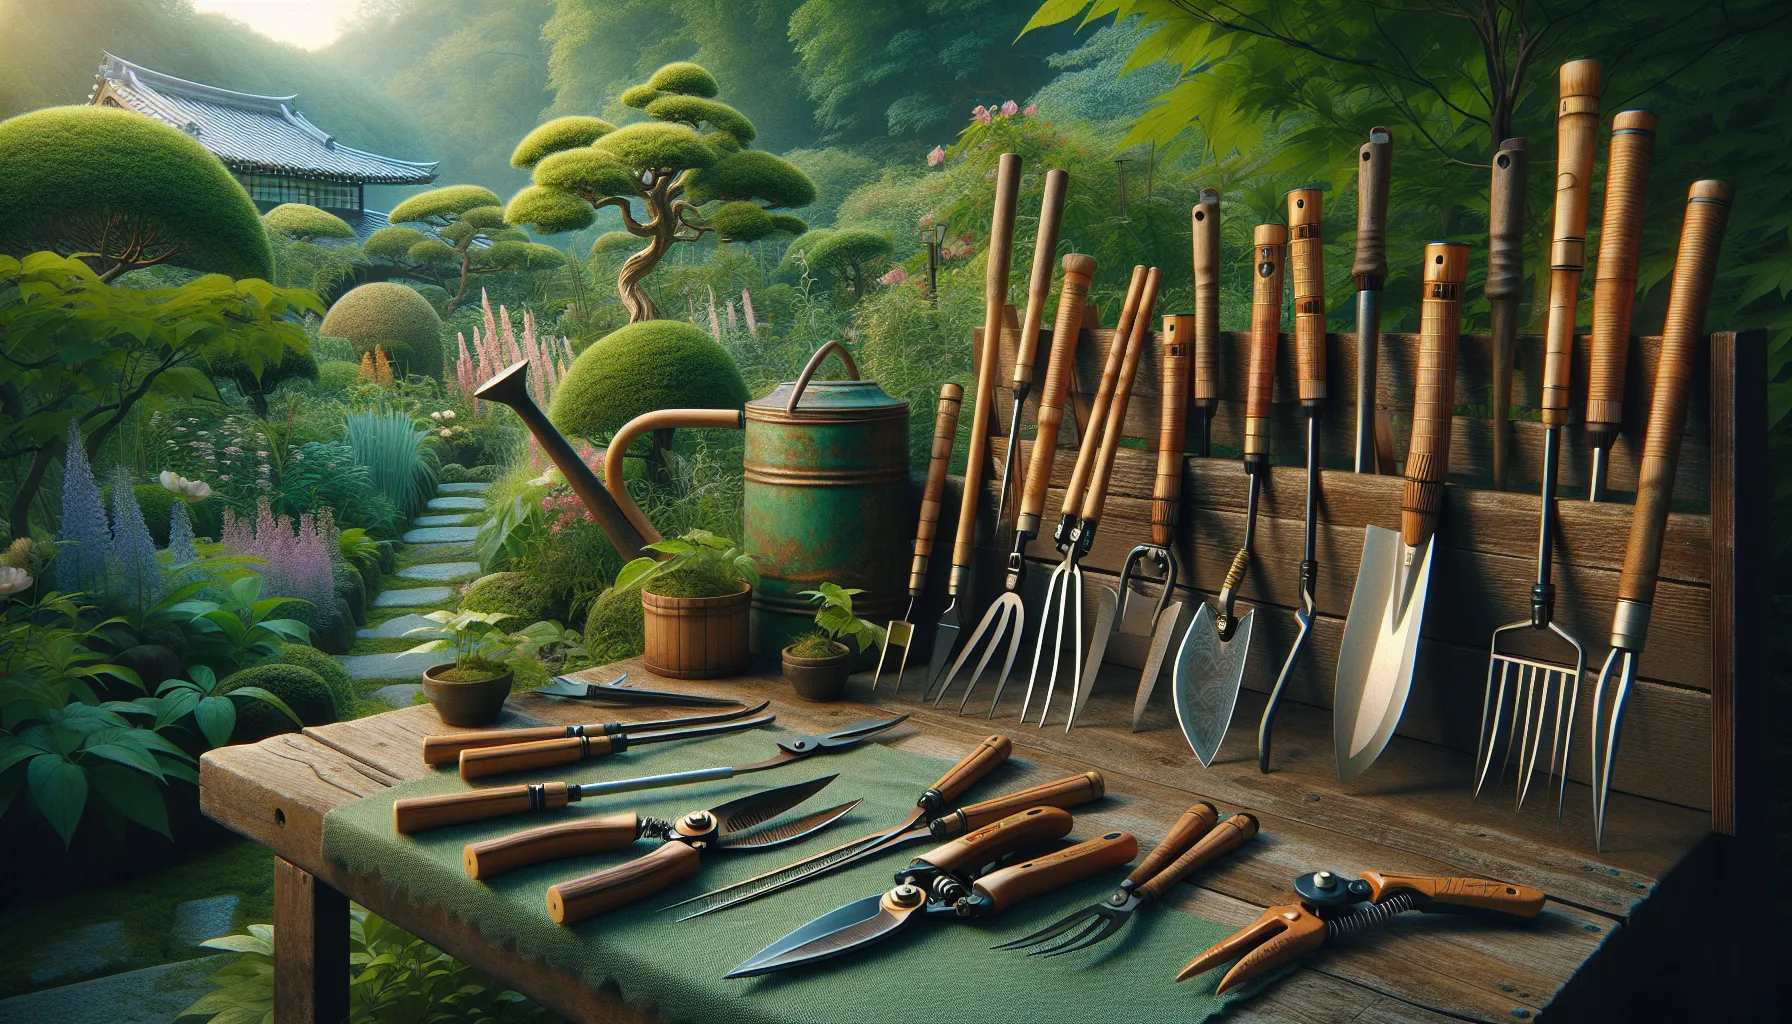 Japanese garden tools are neatly displayed on a wooden table with a beautifully manicured garden in the background.